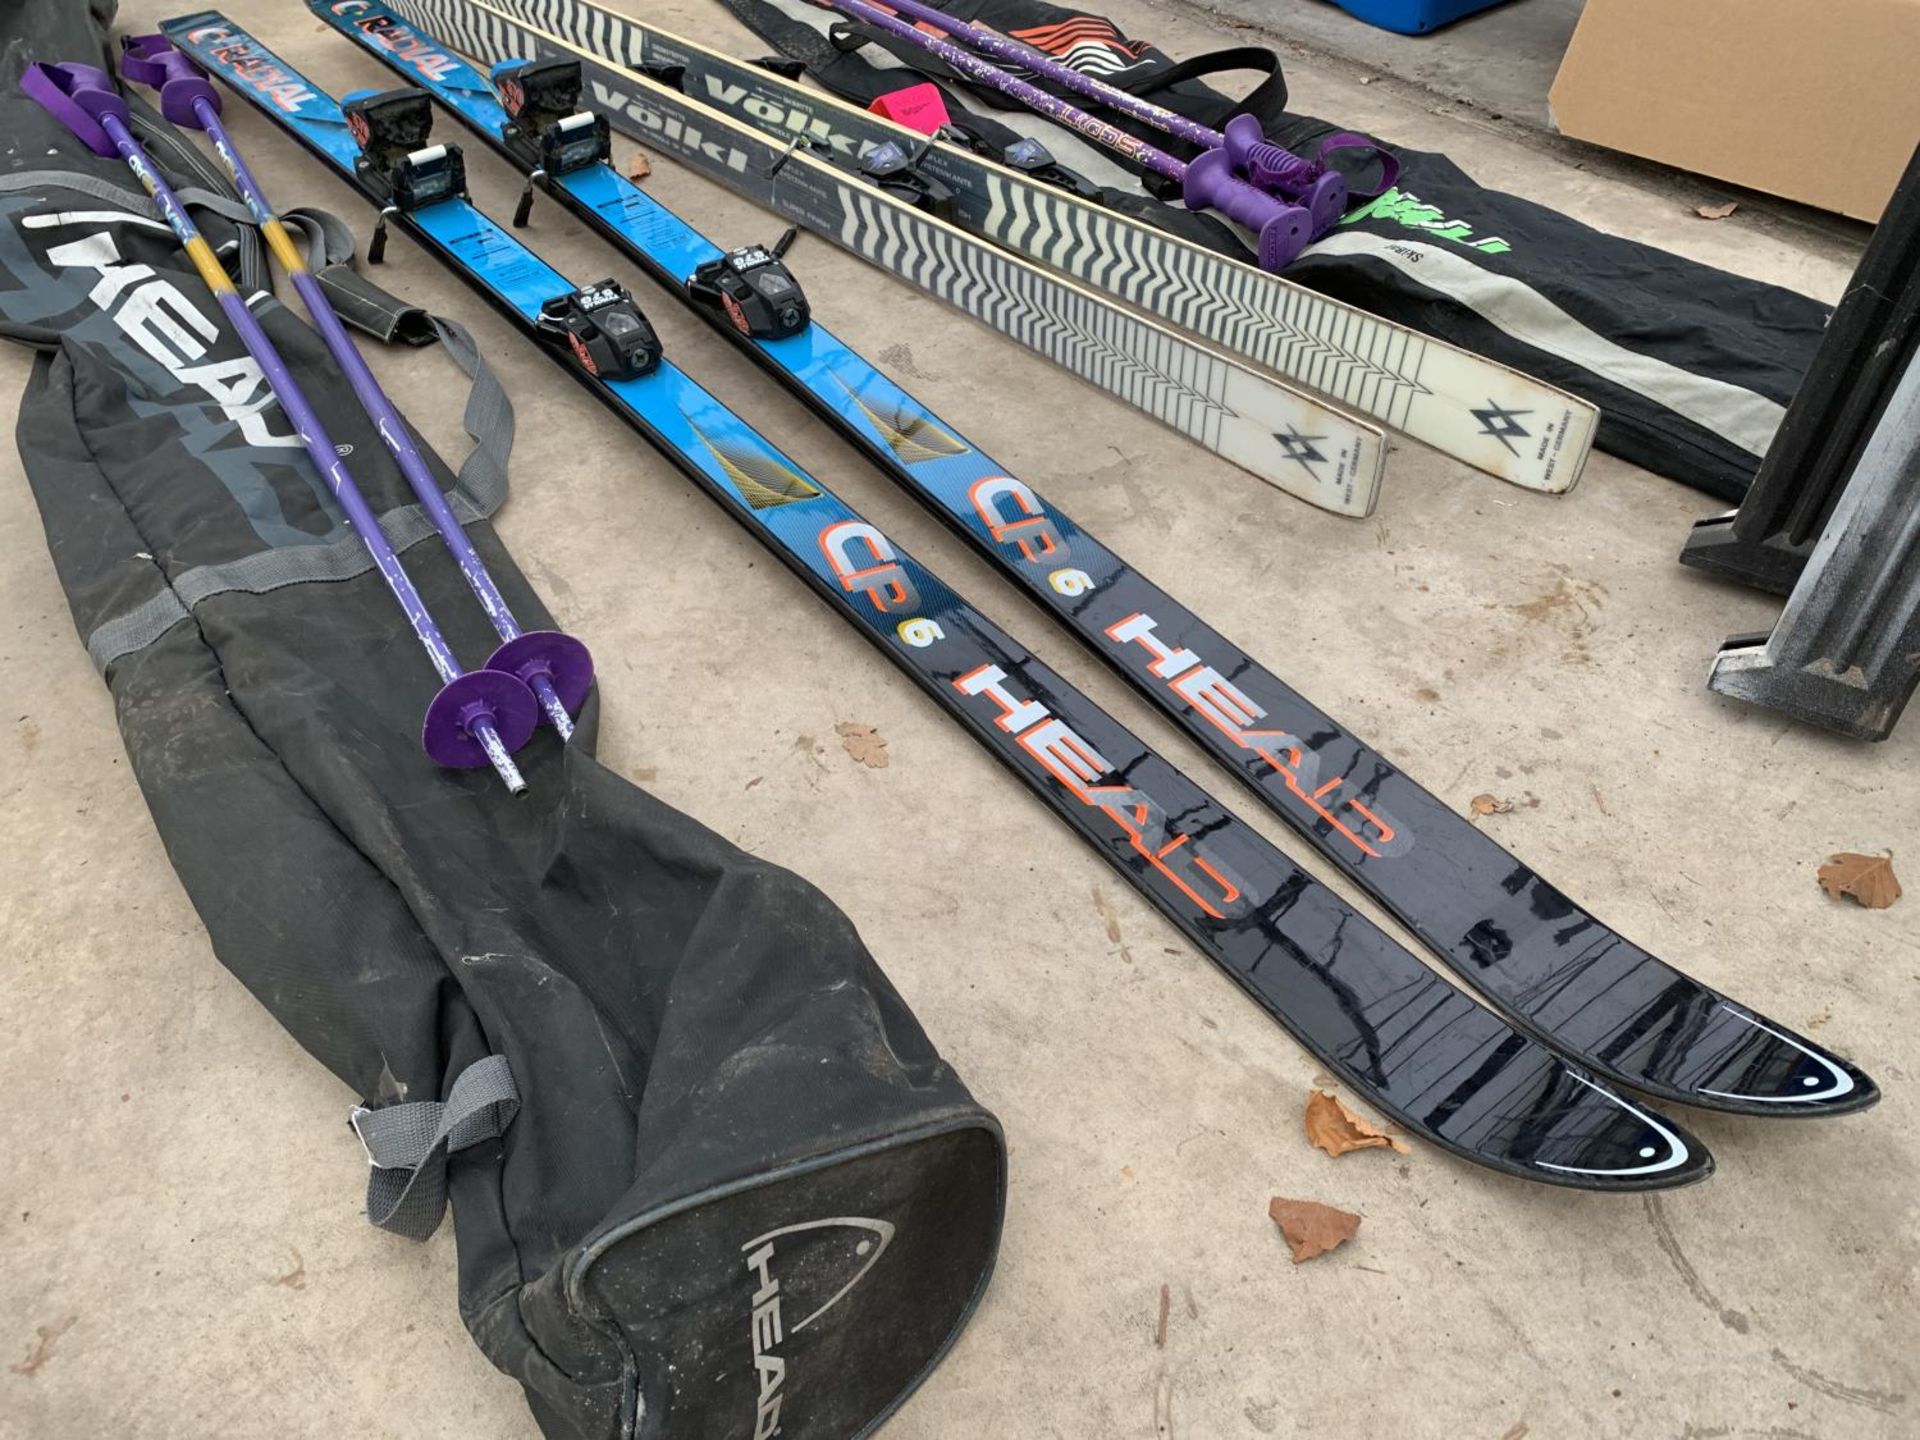 TWO SETS OF SKI'S COMPLETE WITH CARRY CASES - Image 2 of 4